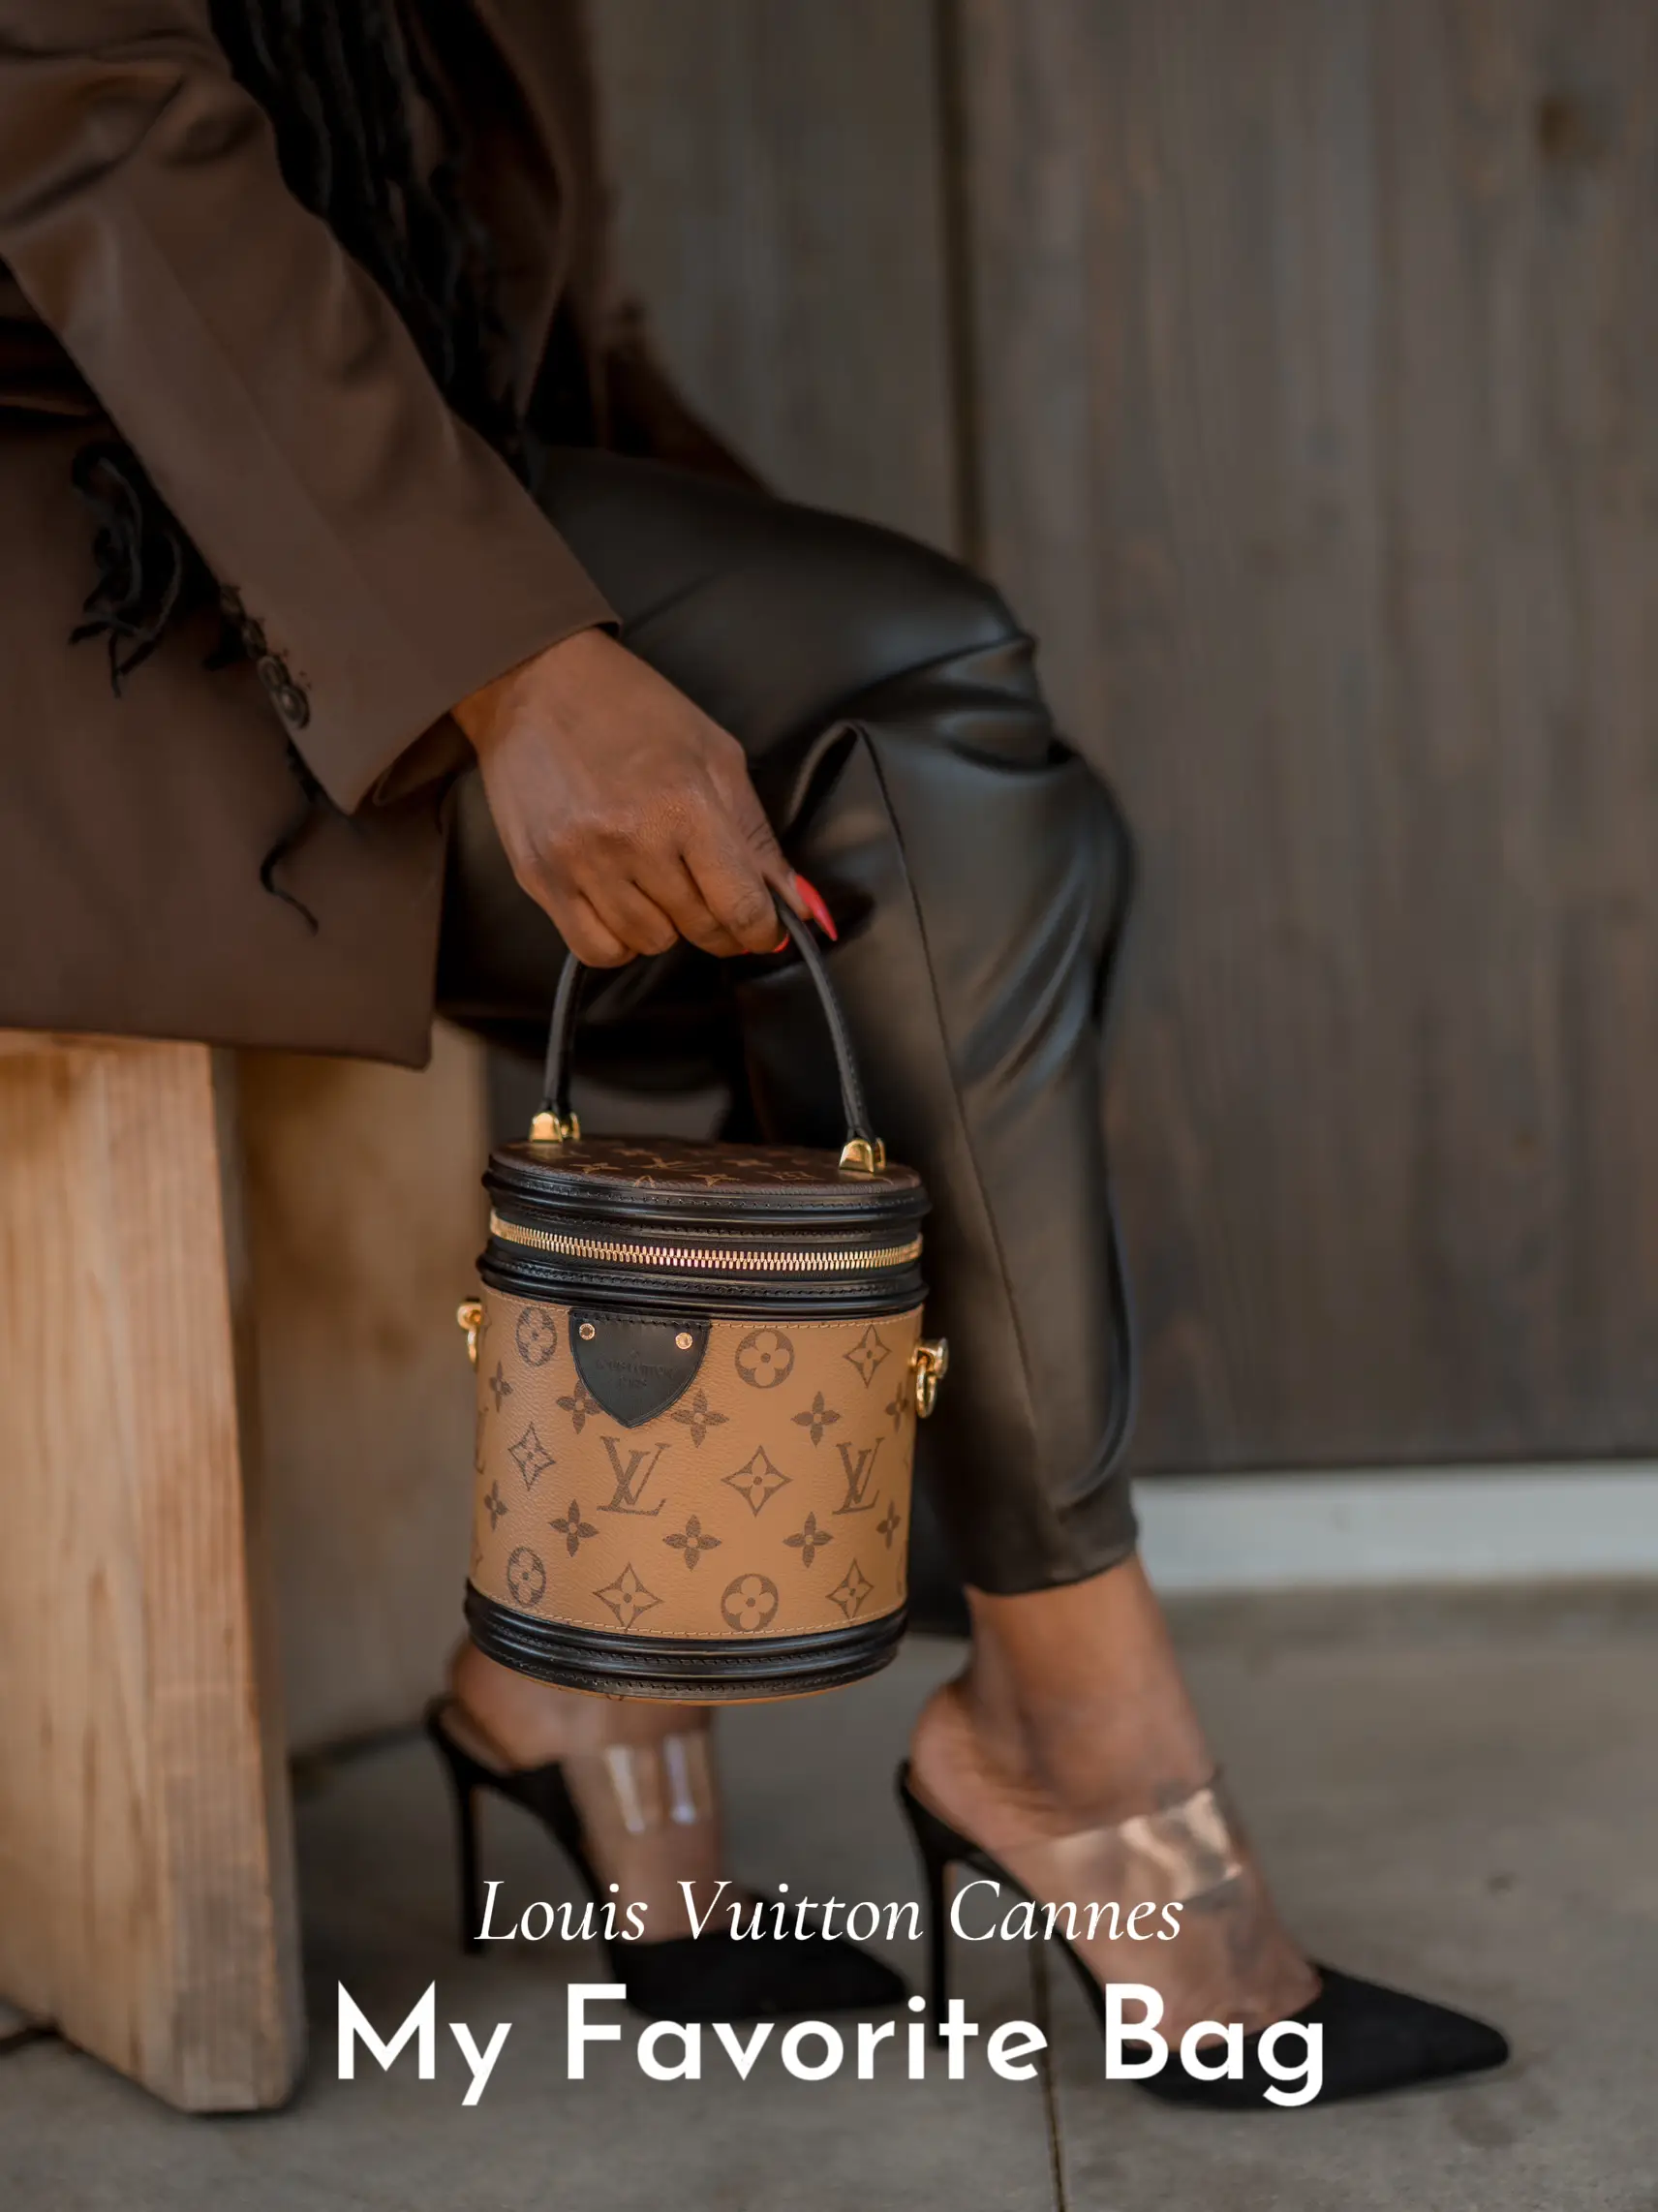 LV cannes  SacMaison ~ branded luxury designers bags accessories